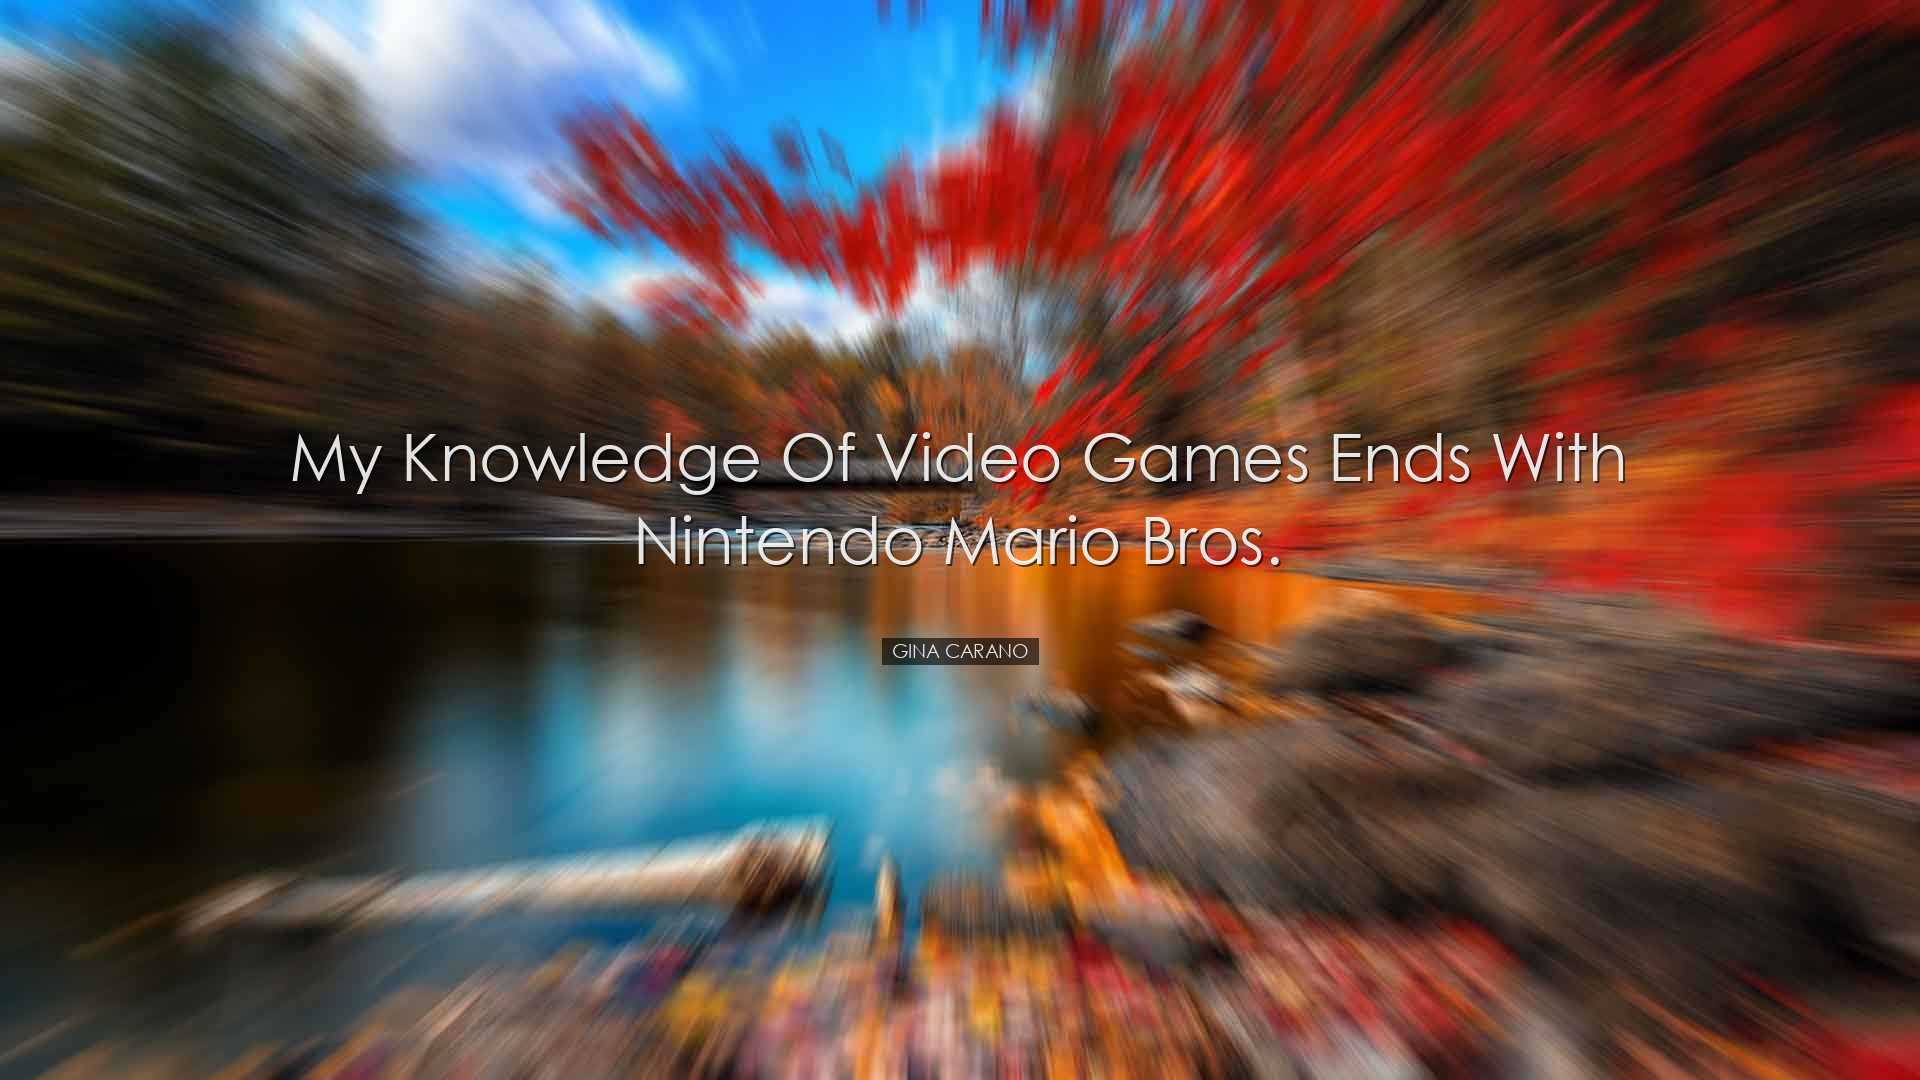 My knowledge of video games ends with Nintendo Mario Bros. - Gina